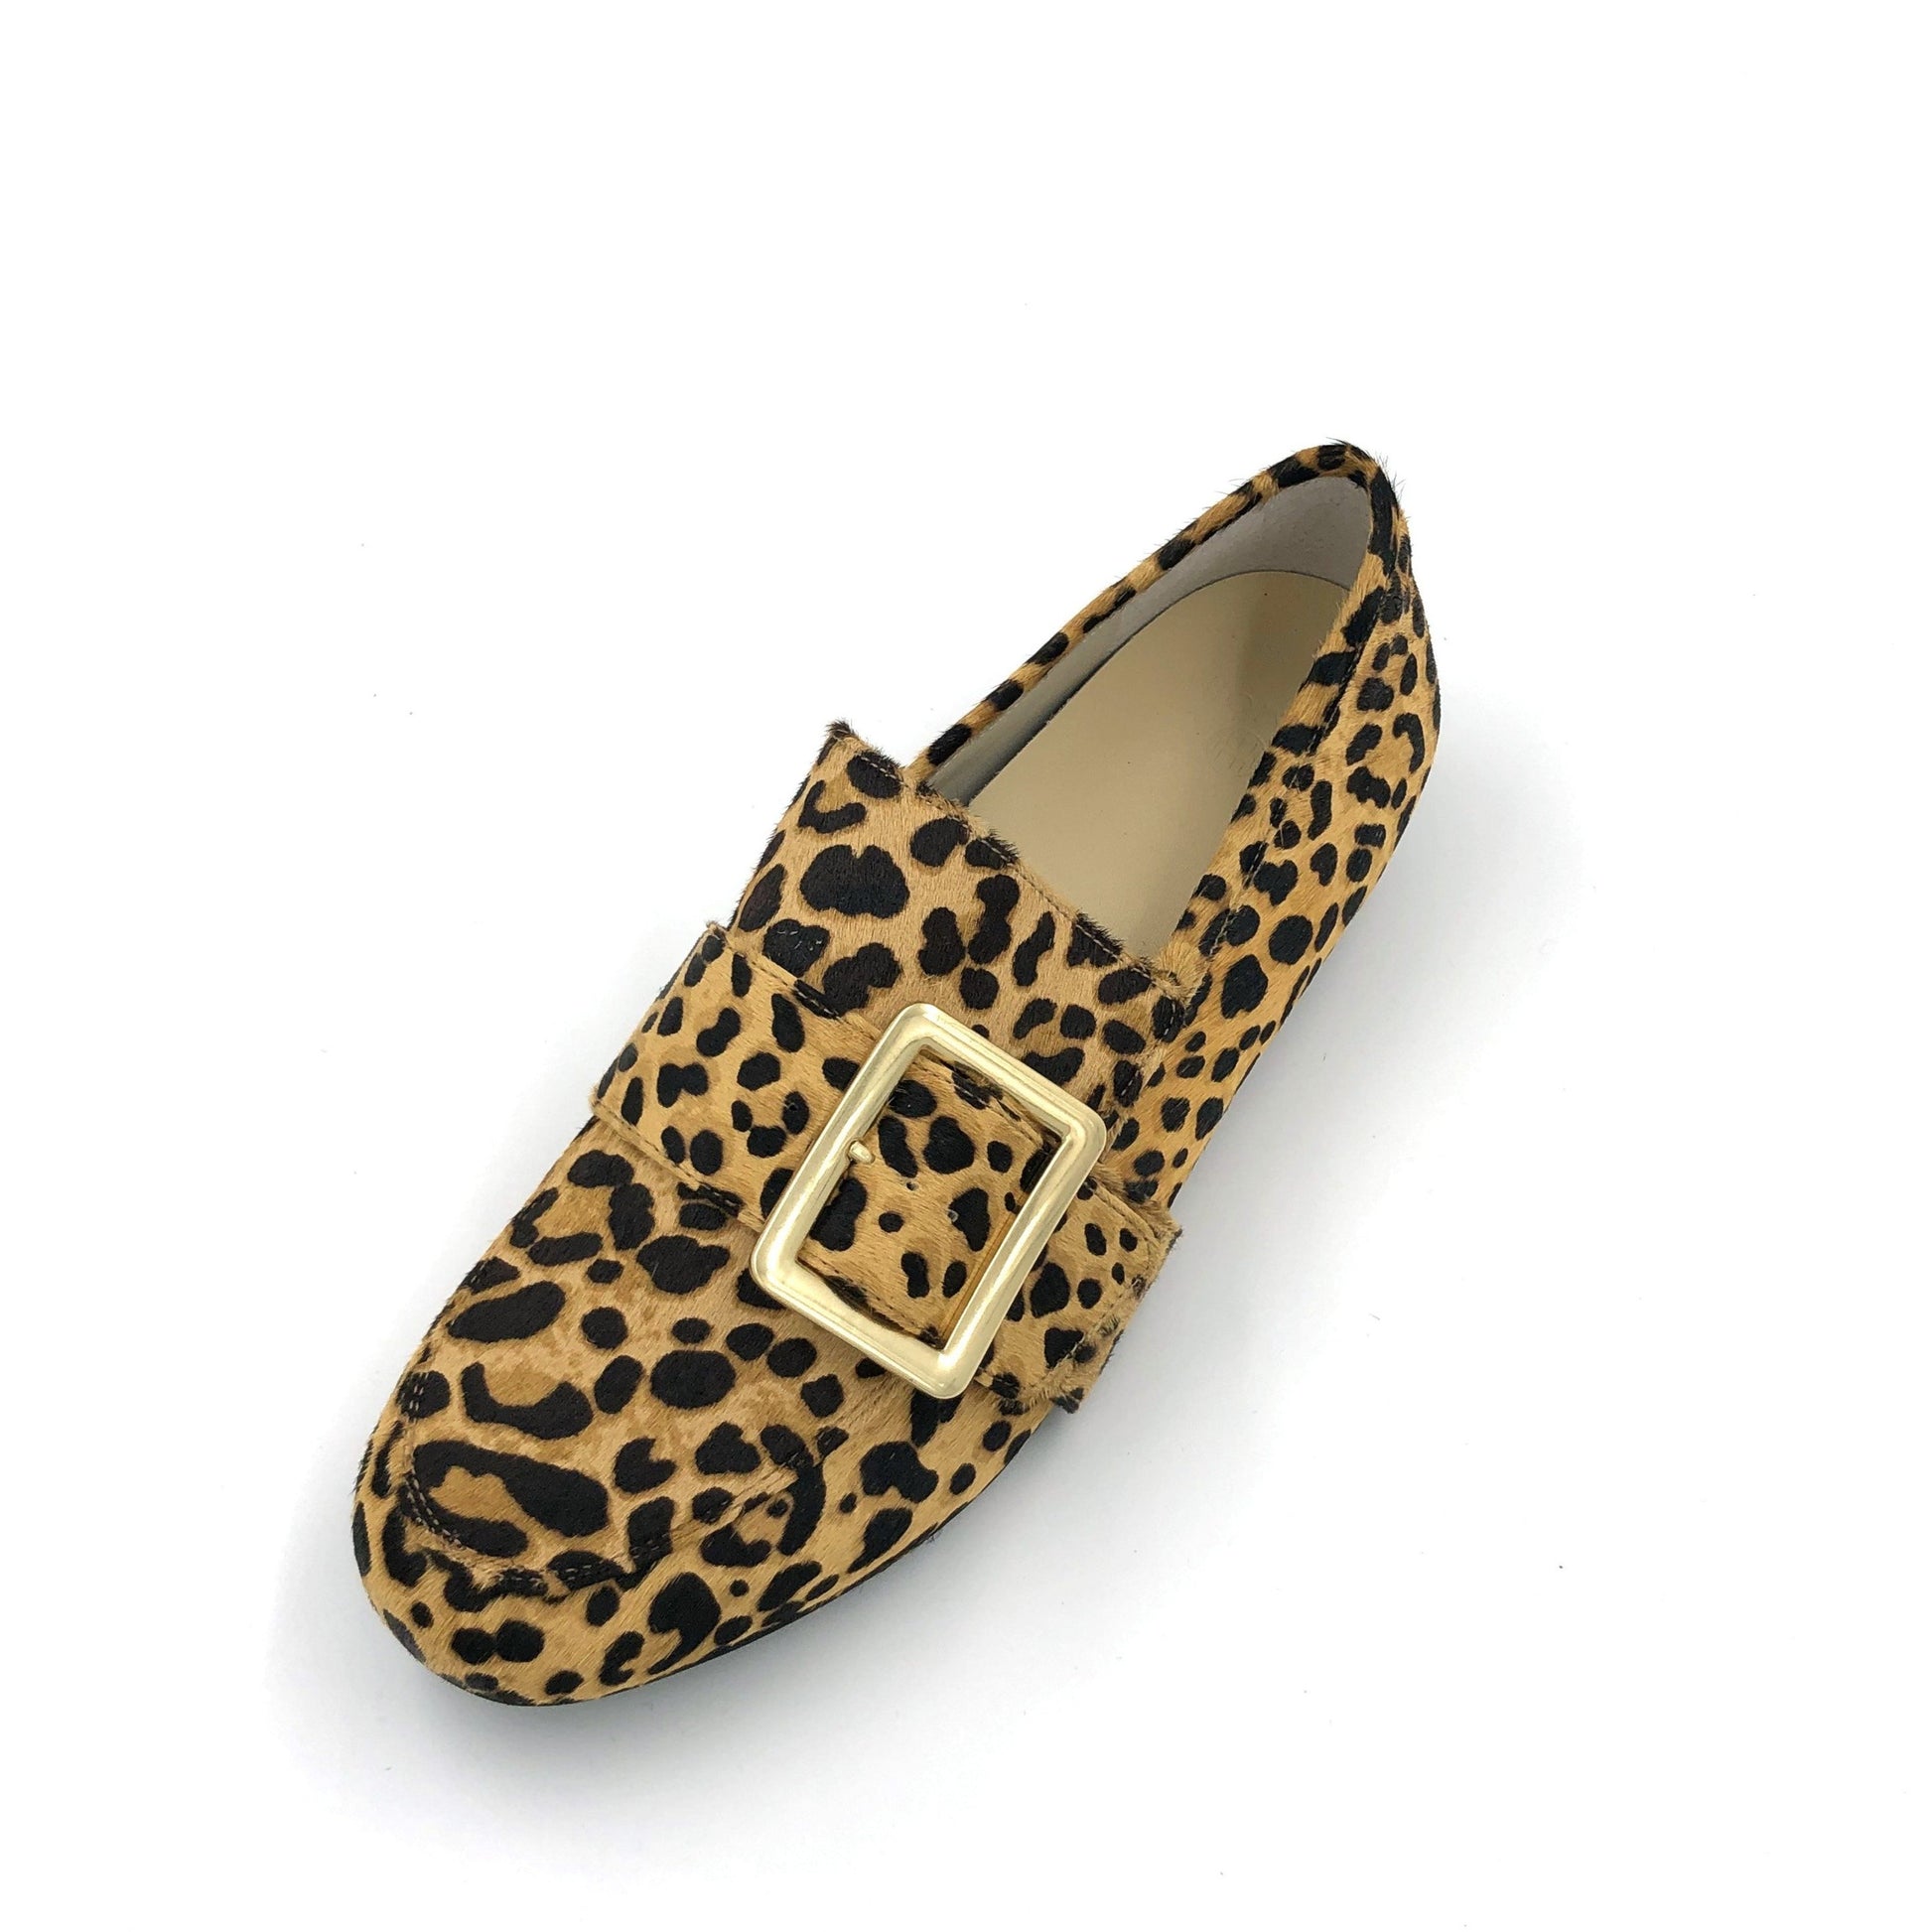 Comfortable Leopard Print Loafer Shoes with Arch Support and Orthotic Friendly, Suitable for Wide feet and Plantar Fasciitis